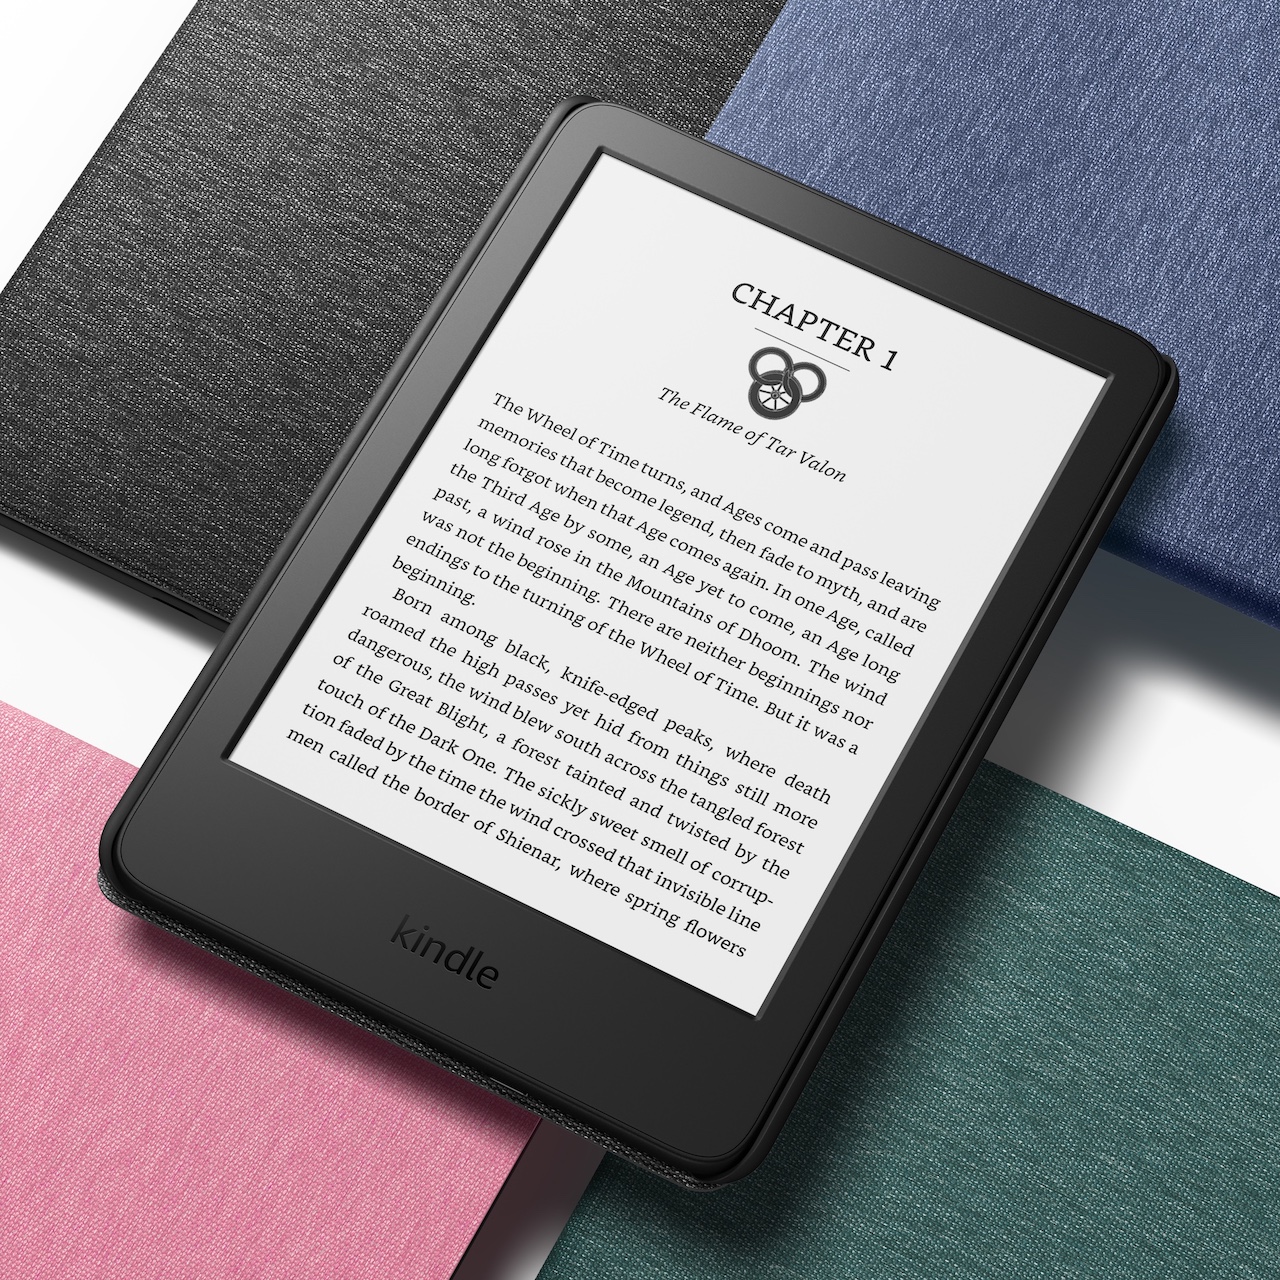 amazon-s-new-kindle-offers-twice-the-storage-a-sharper-screen-and-usb